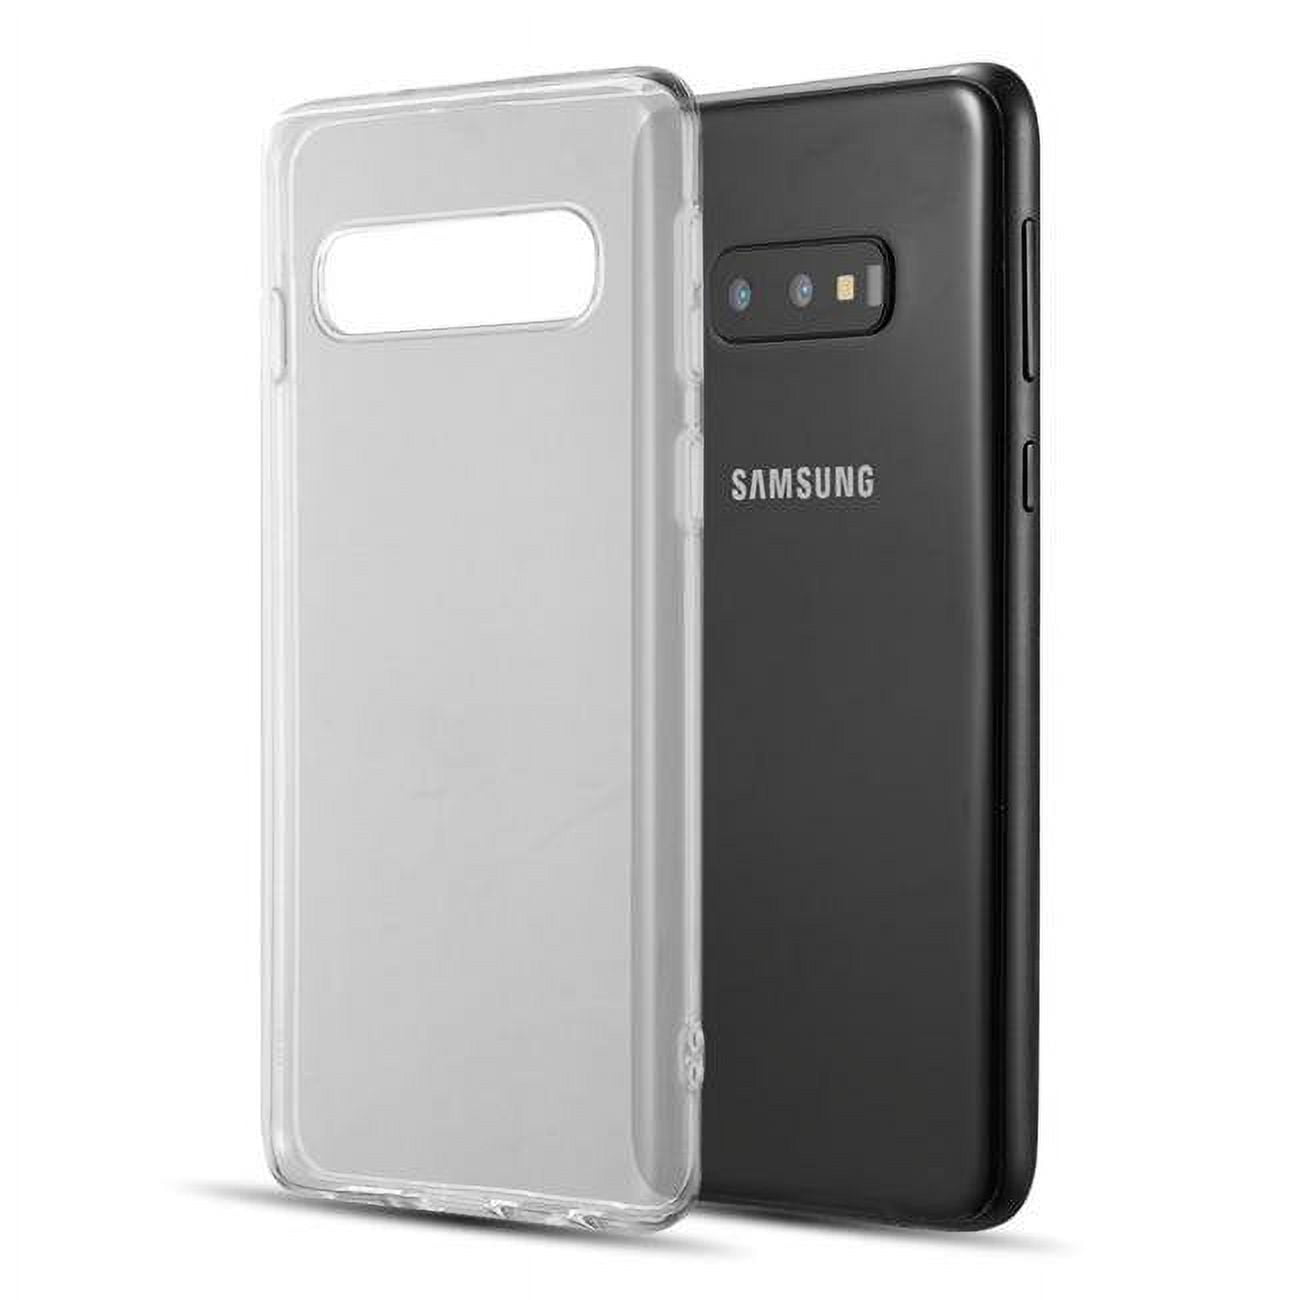 For SAMSUNG GALAXY S7 EDGE CLEAR VIEW FLIP CASE SMART BOOK MIRROR LUXURY  COVER